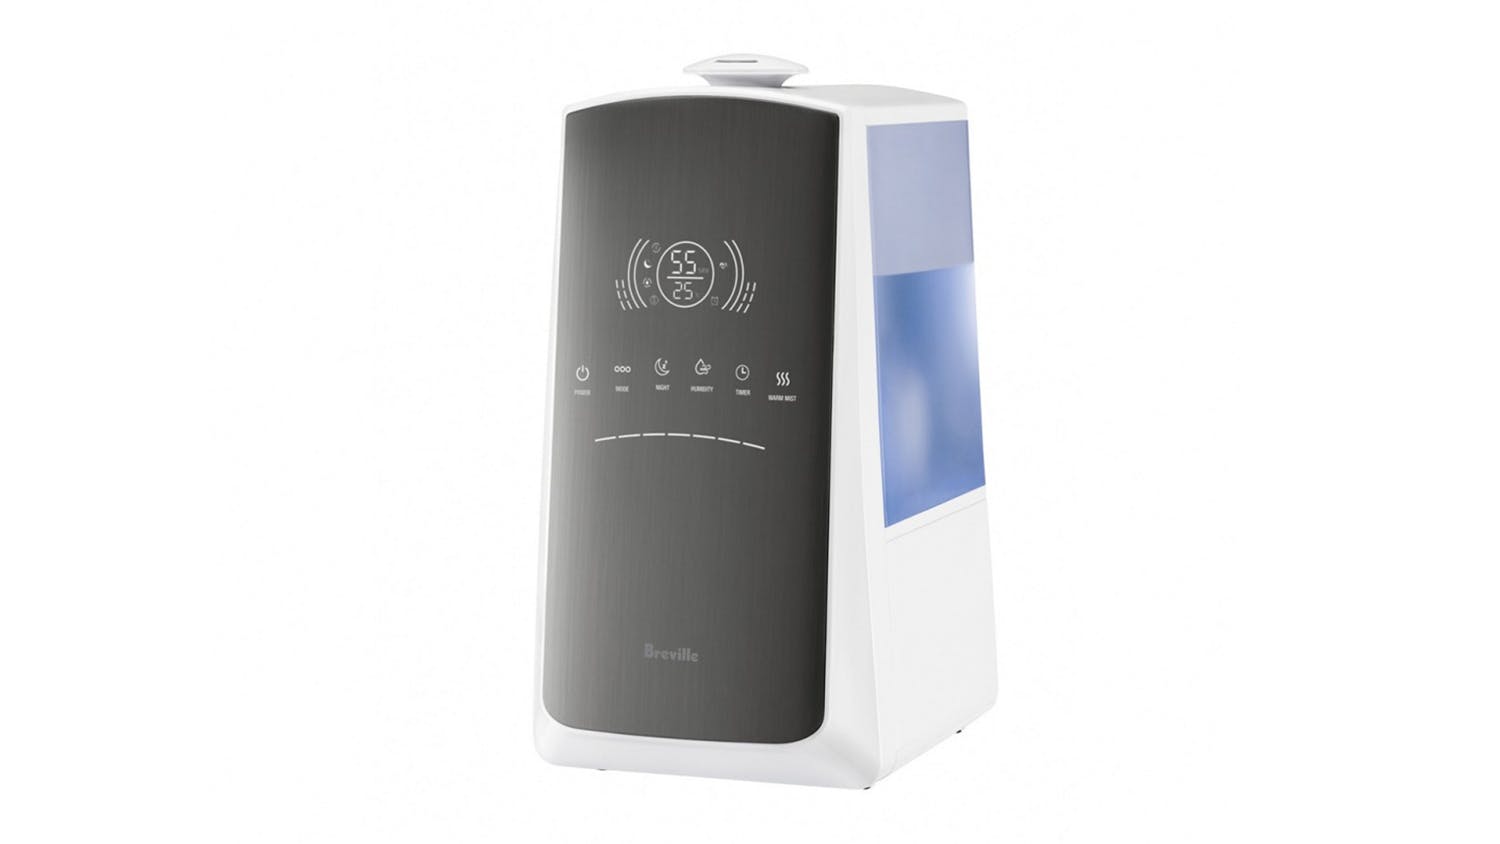 Breville The Smart Mist' Humidifier